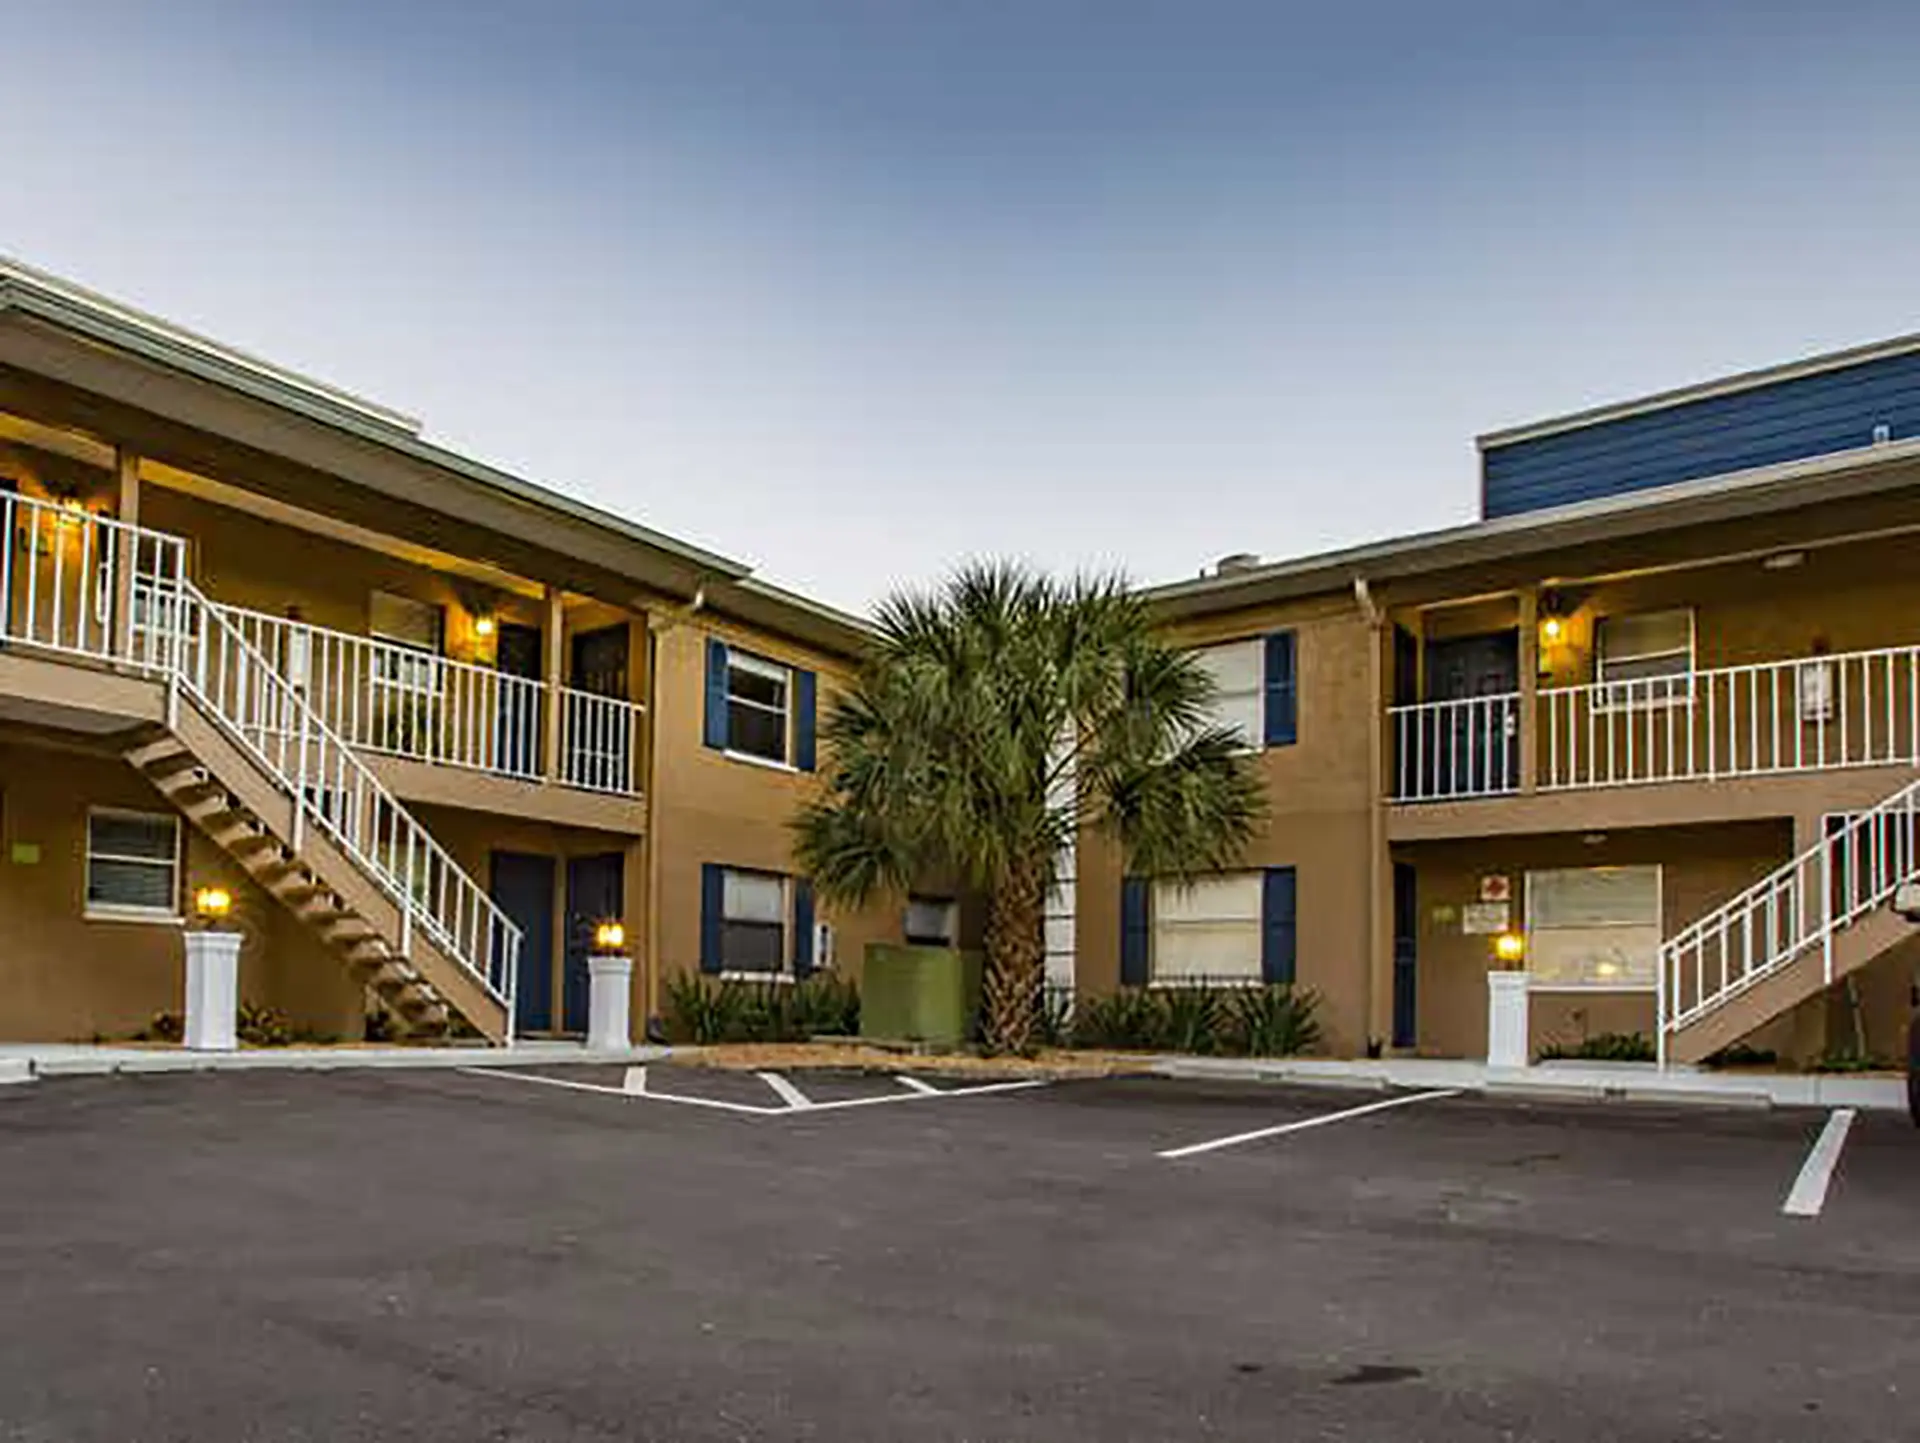 artiisan cove exterior with parking lot and two-story building